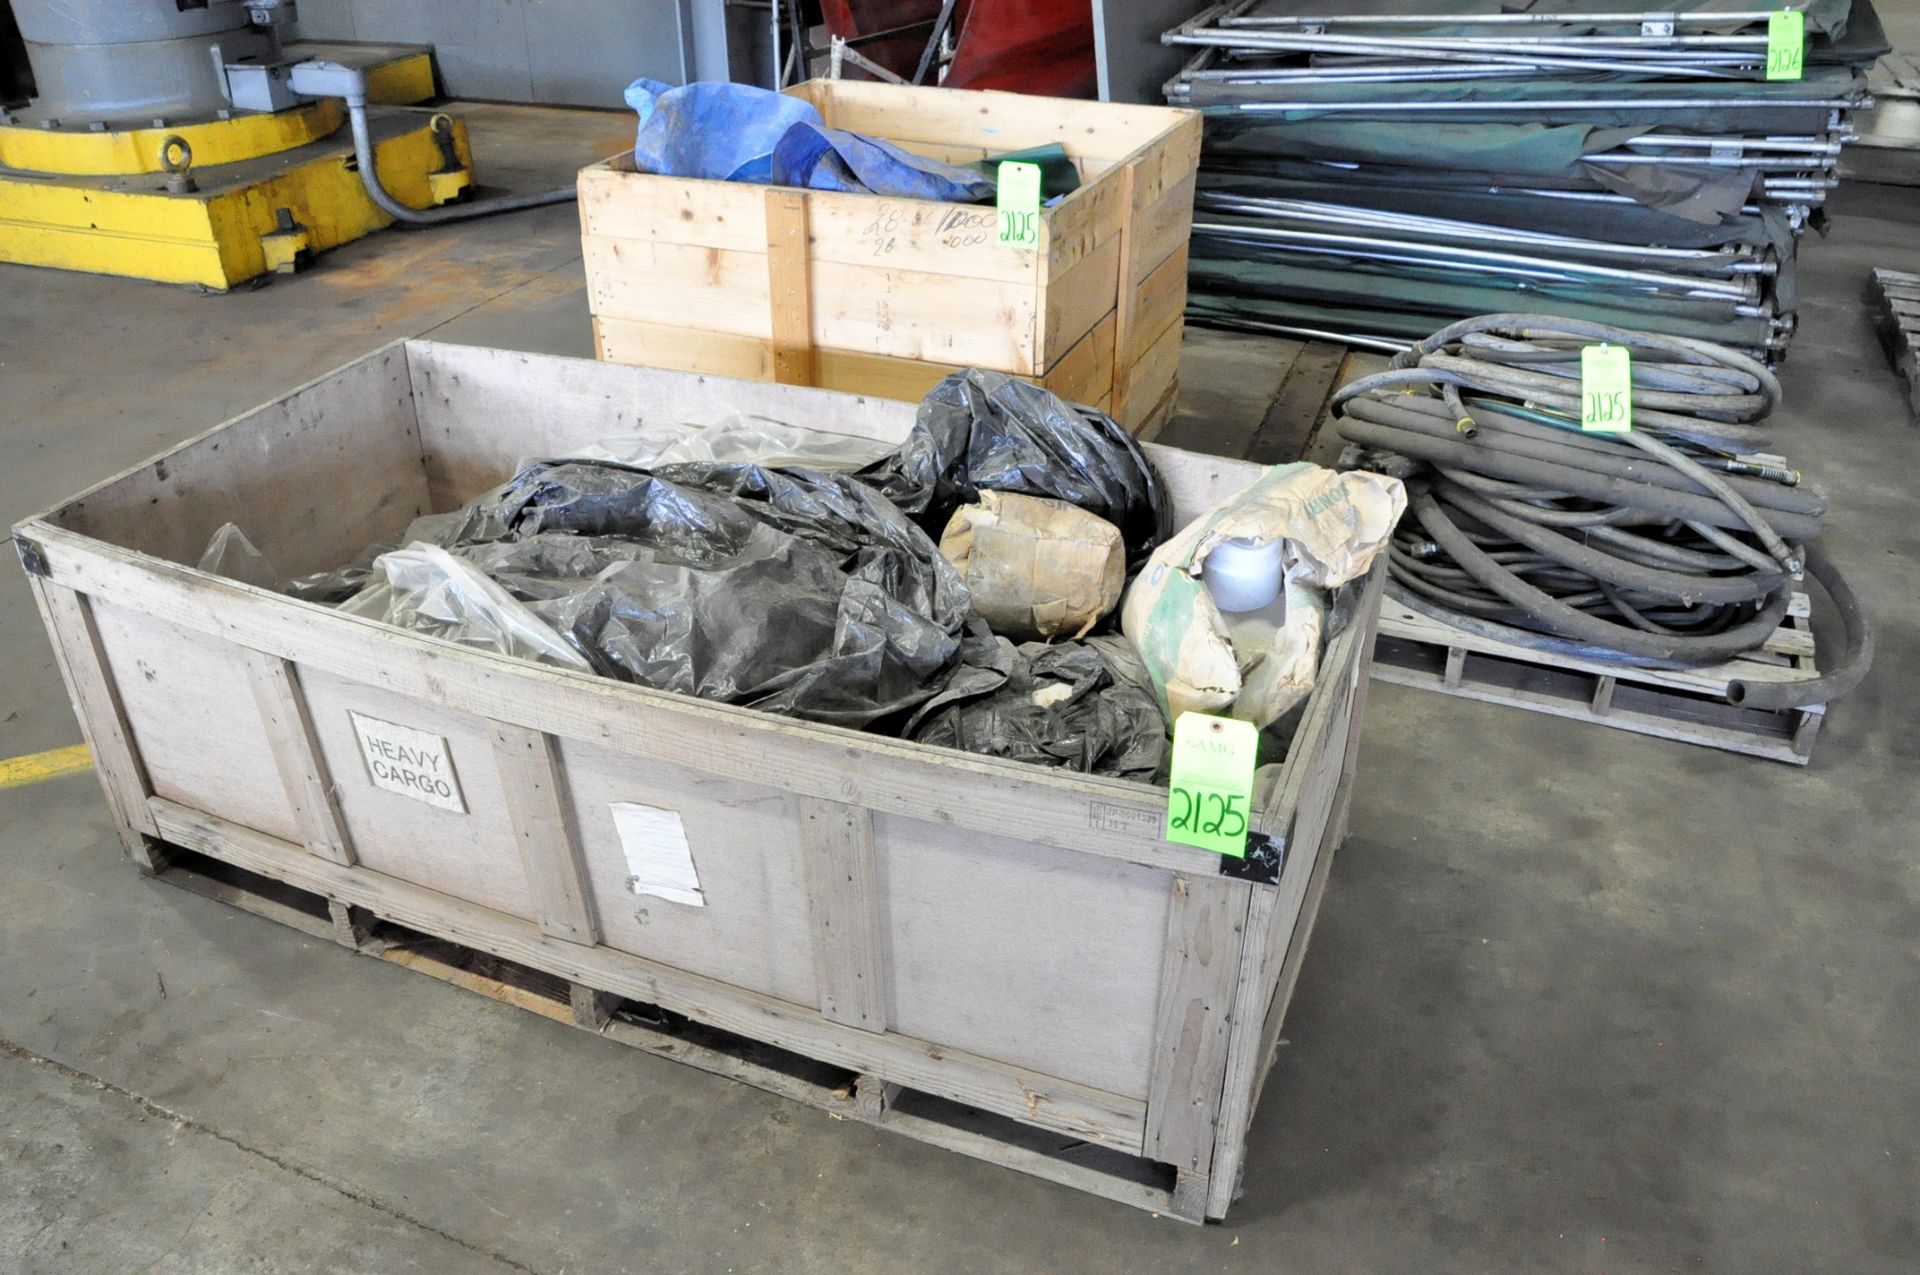 Lot-Unisorb Product, Hoses and Tarps in (2) Crates and (1) Pallet, (F-21), (Green Tag)